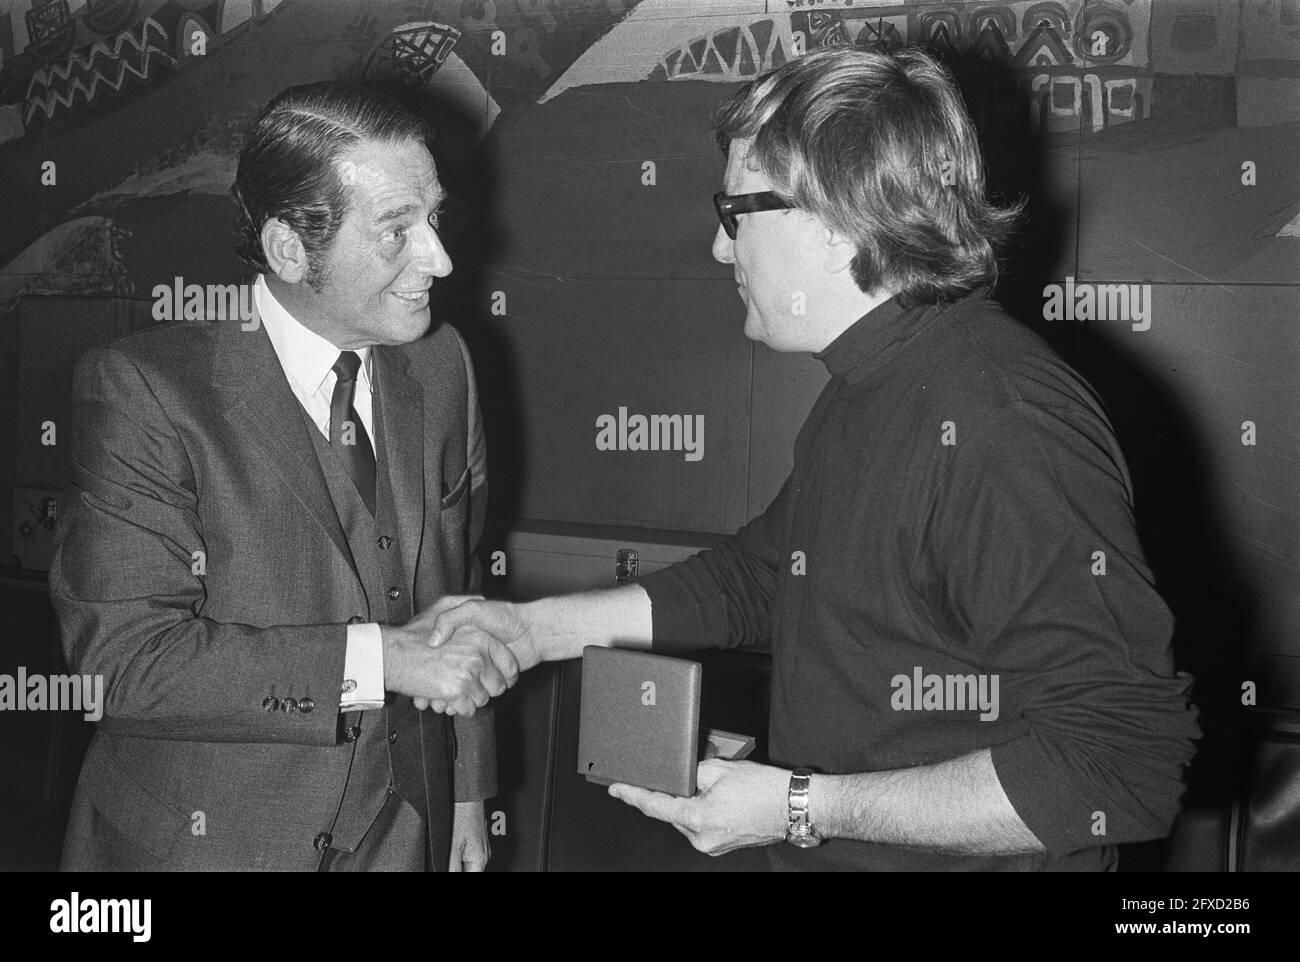 Peter Oosthoek receives Art Critic Award in Heineken Brewery Amsterdam, (r) P. Oosthoek receives award from Mr. Joppe, September 1, 1971, receipts, awards, The Netherlands, 20th century press agency photo, news to remember, documentary, historic photography 1945-1990, visual stories, human history of the Twentieth Century, capturing moments in time Stock Photo